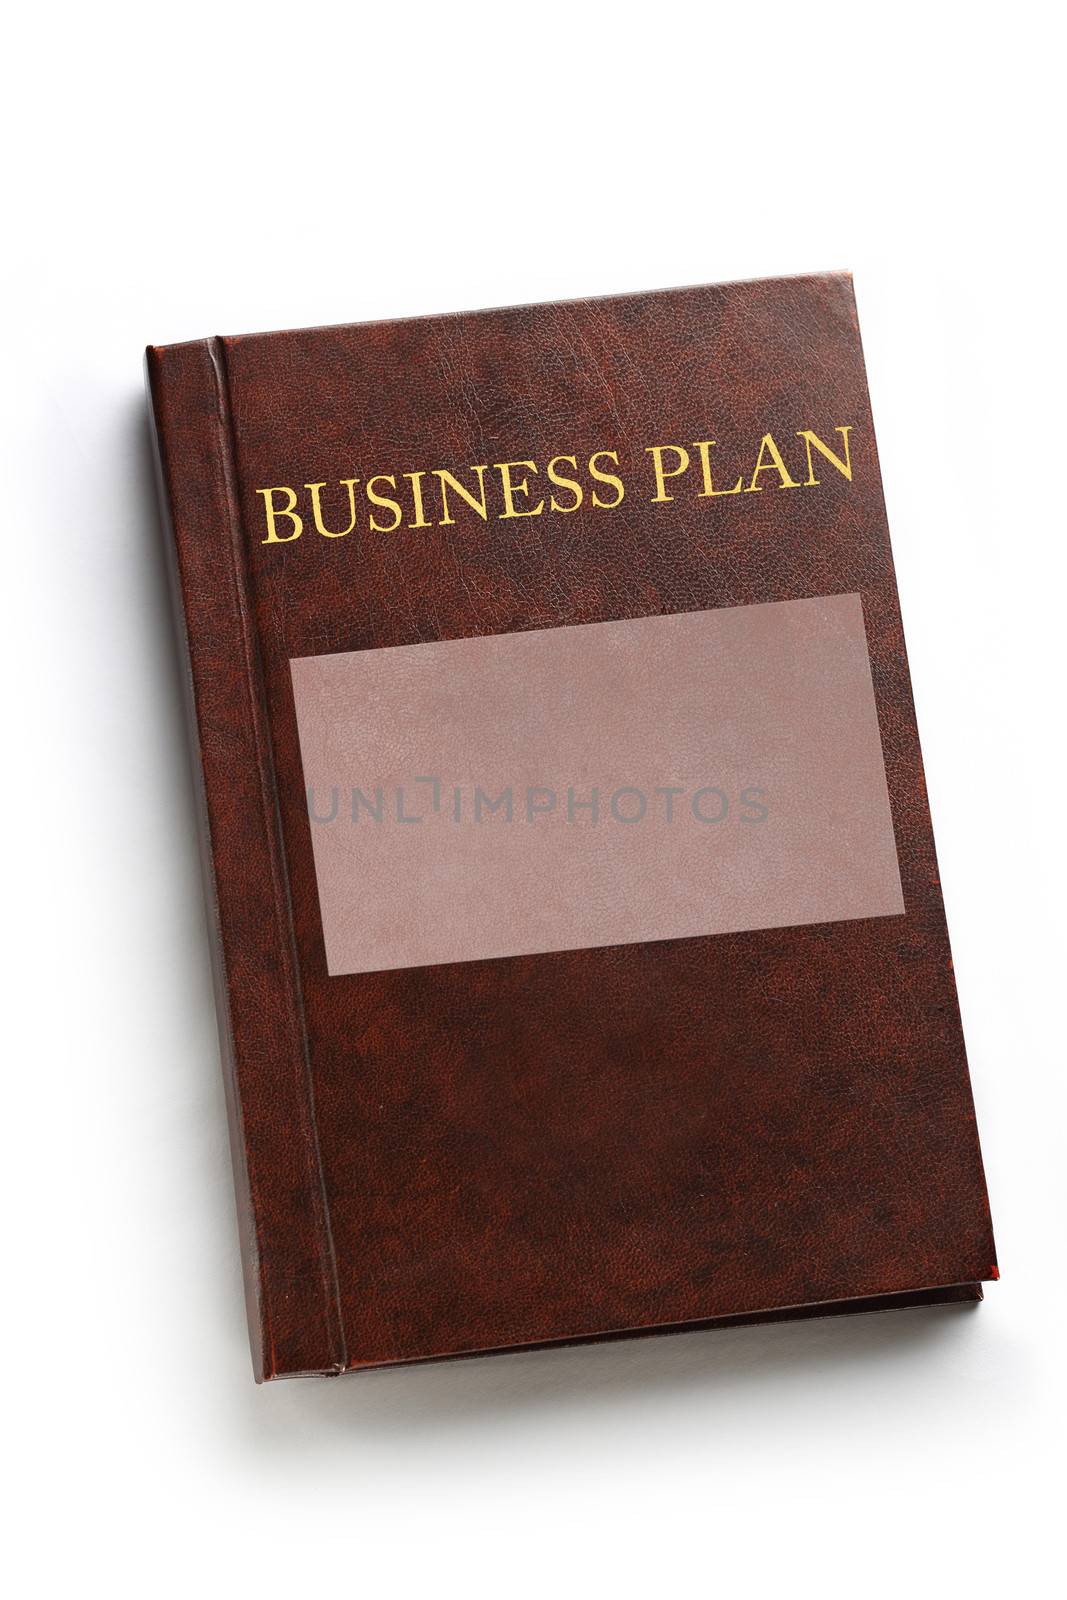 Business plan book on white